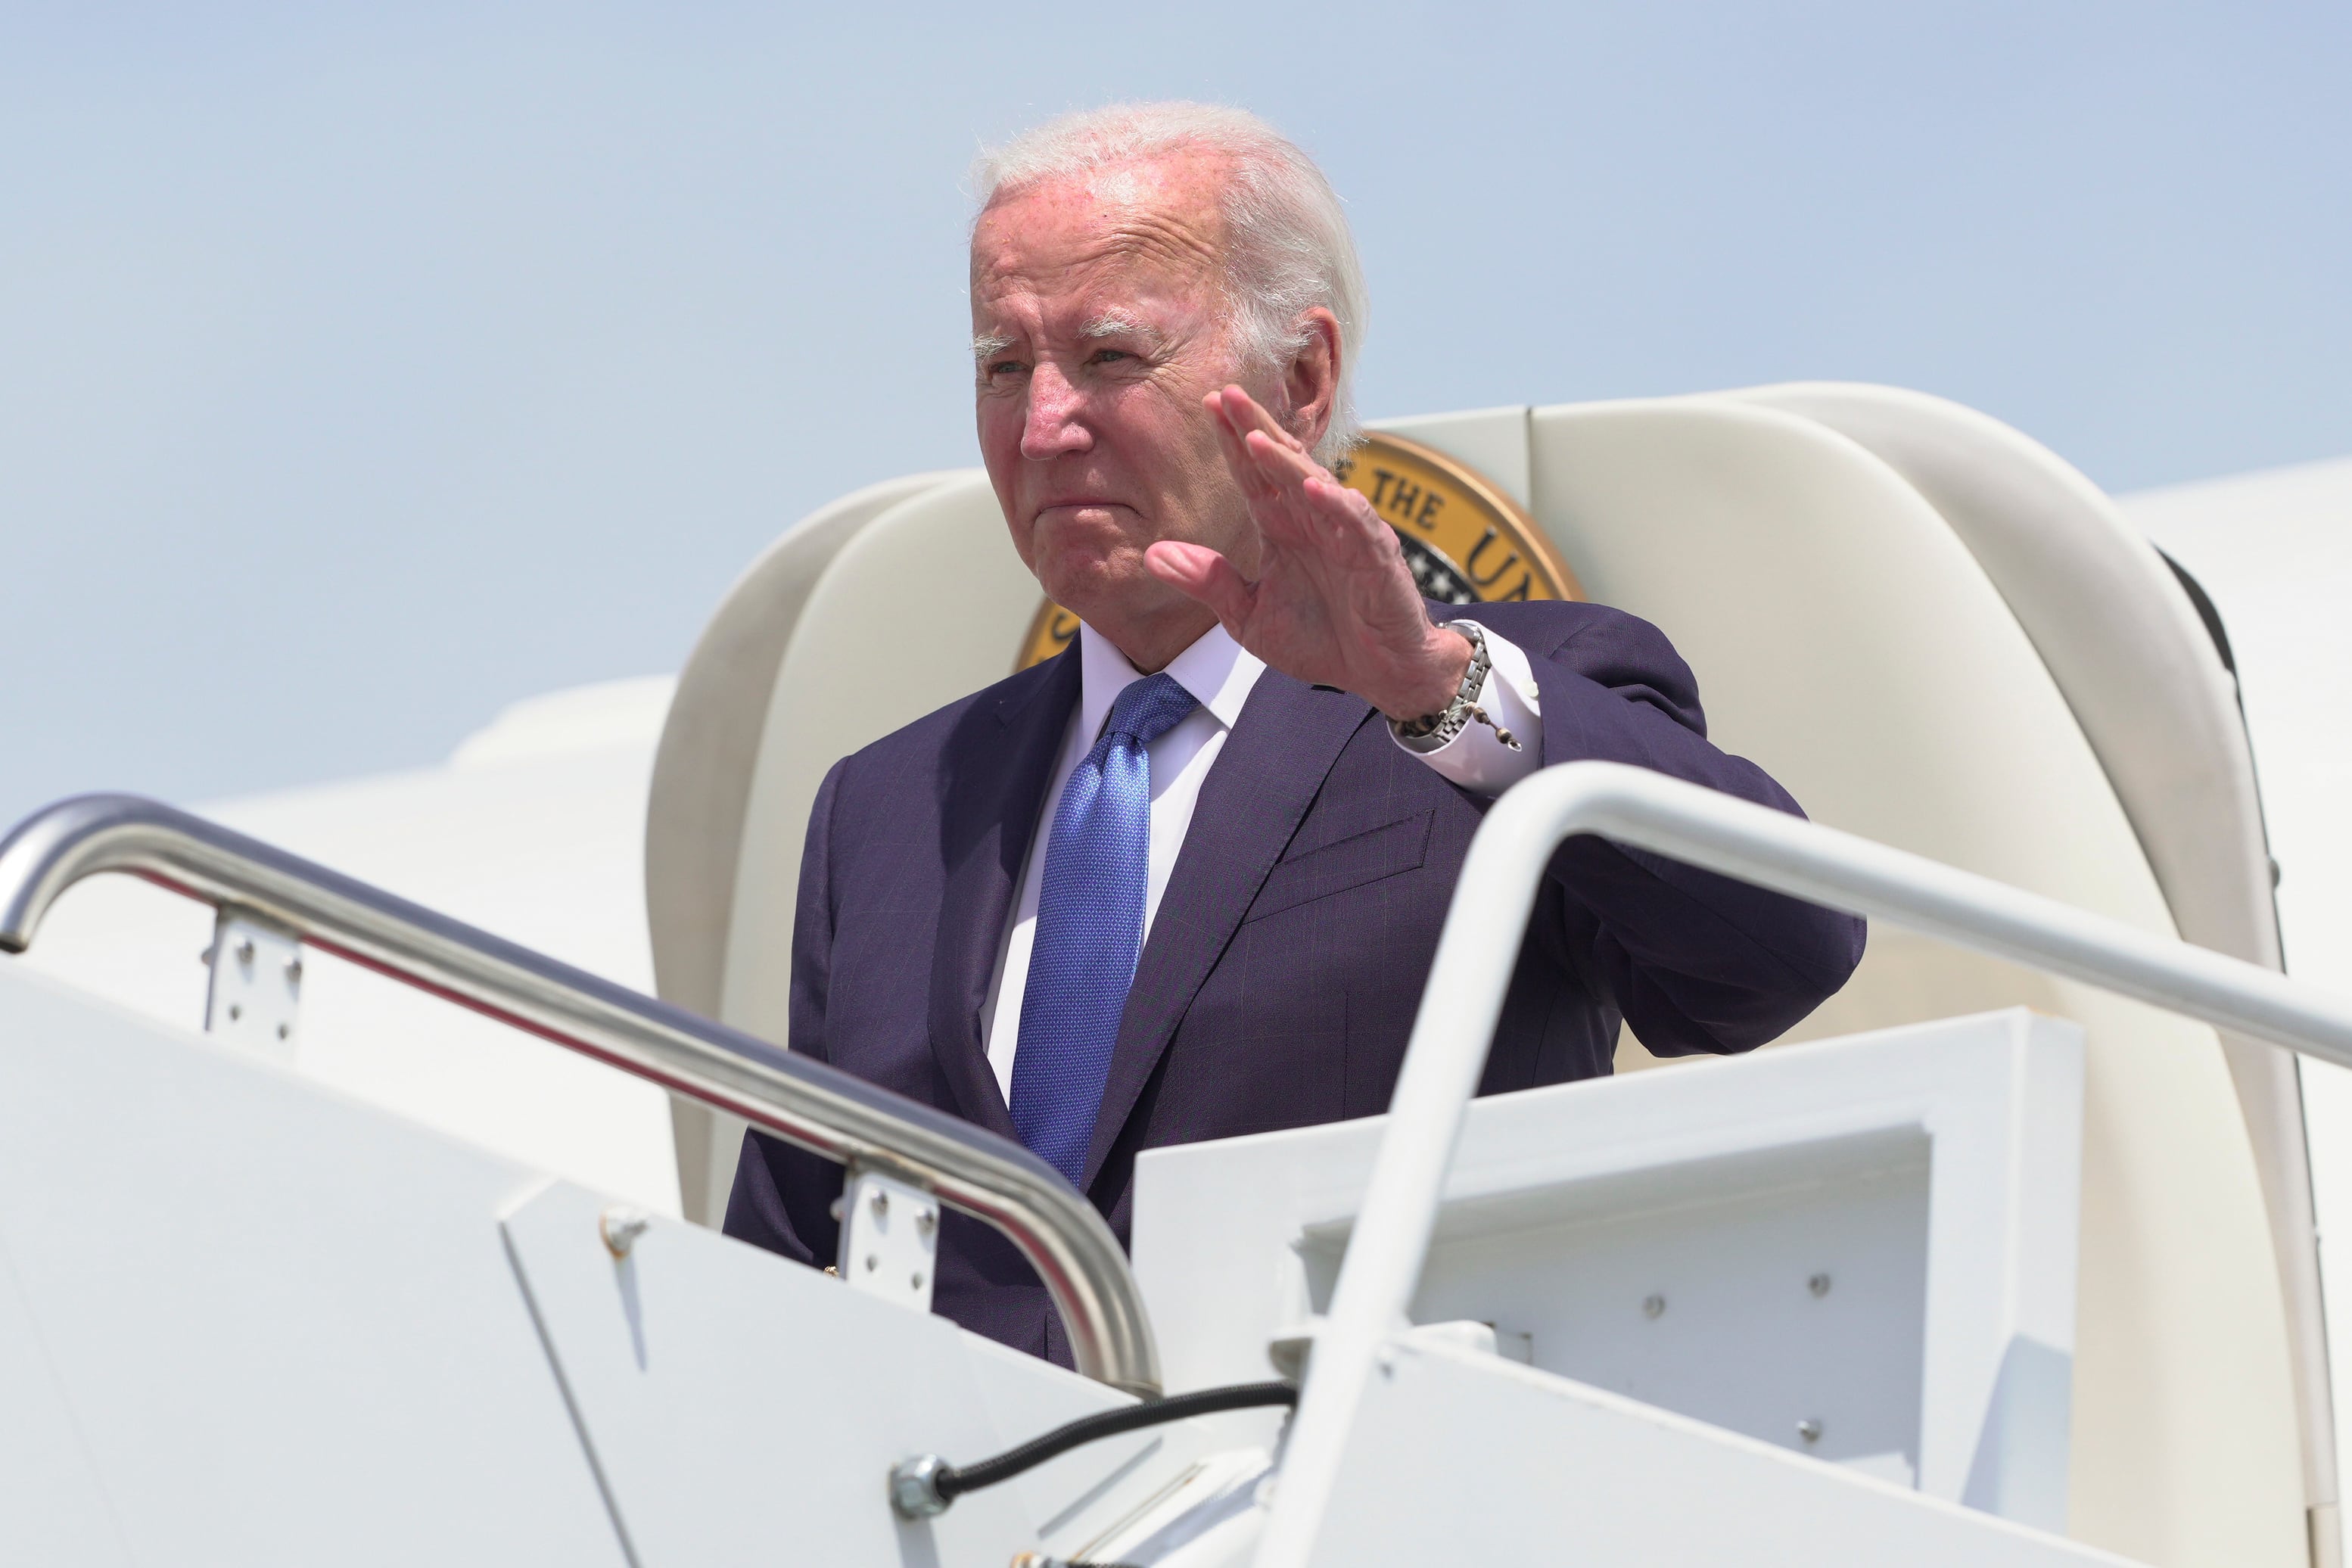 Biden will make a case for his legacy - and for Harris to continue it - in his Oval Office address